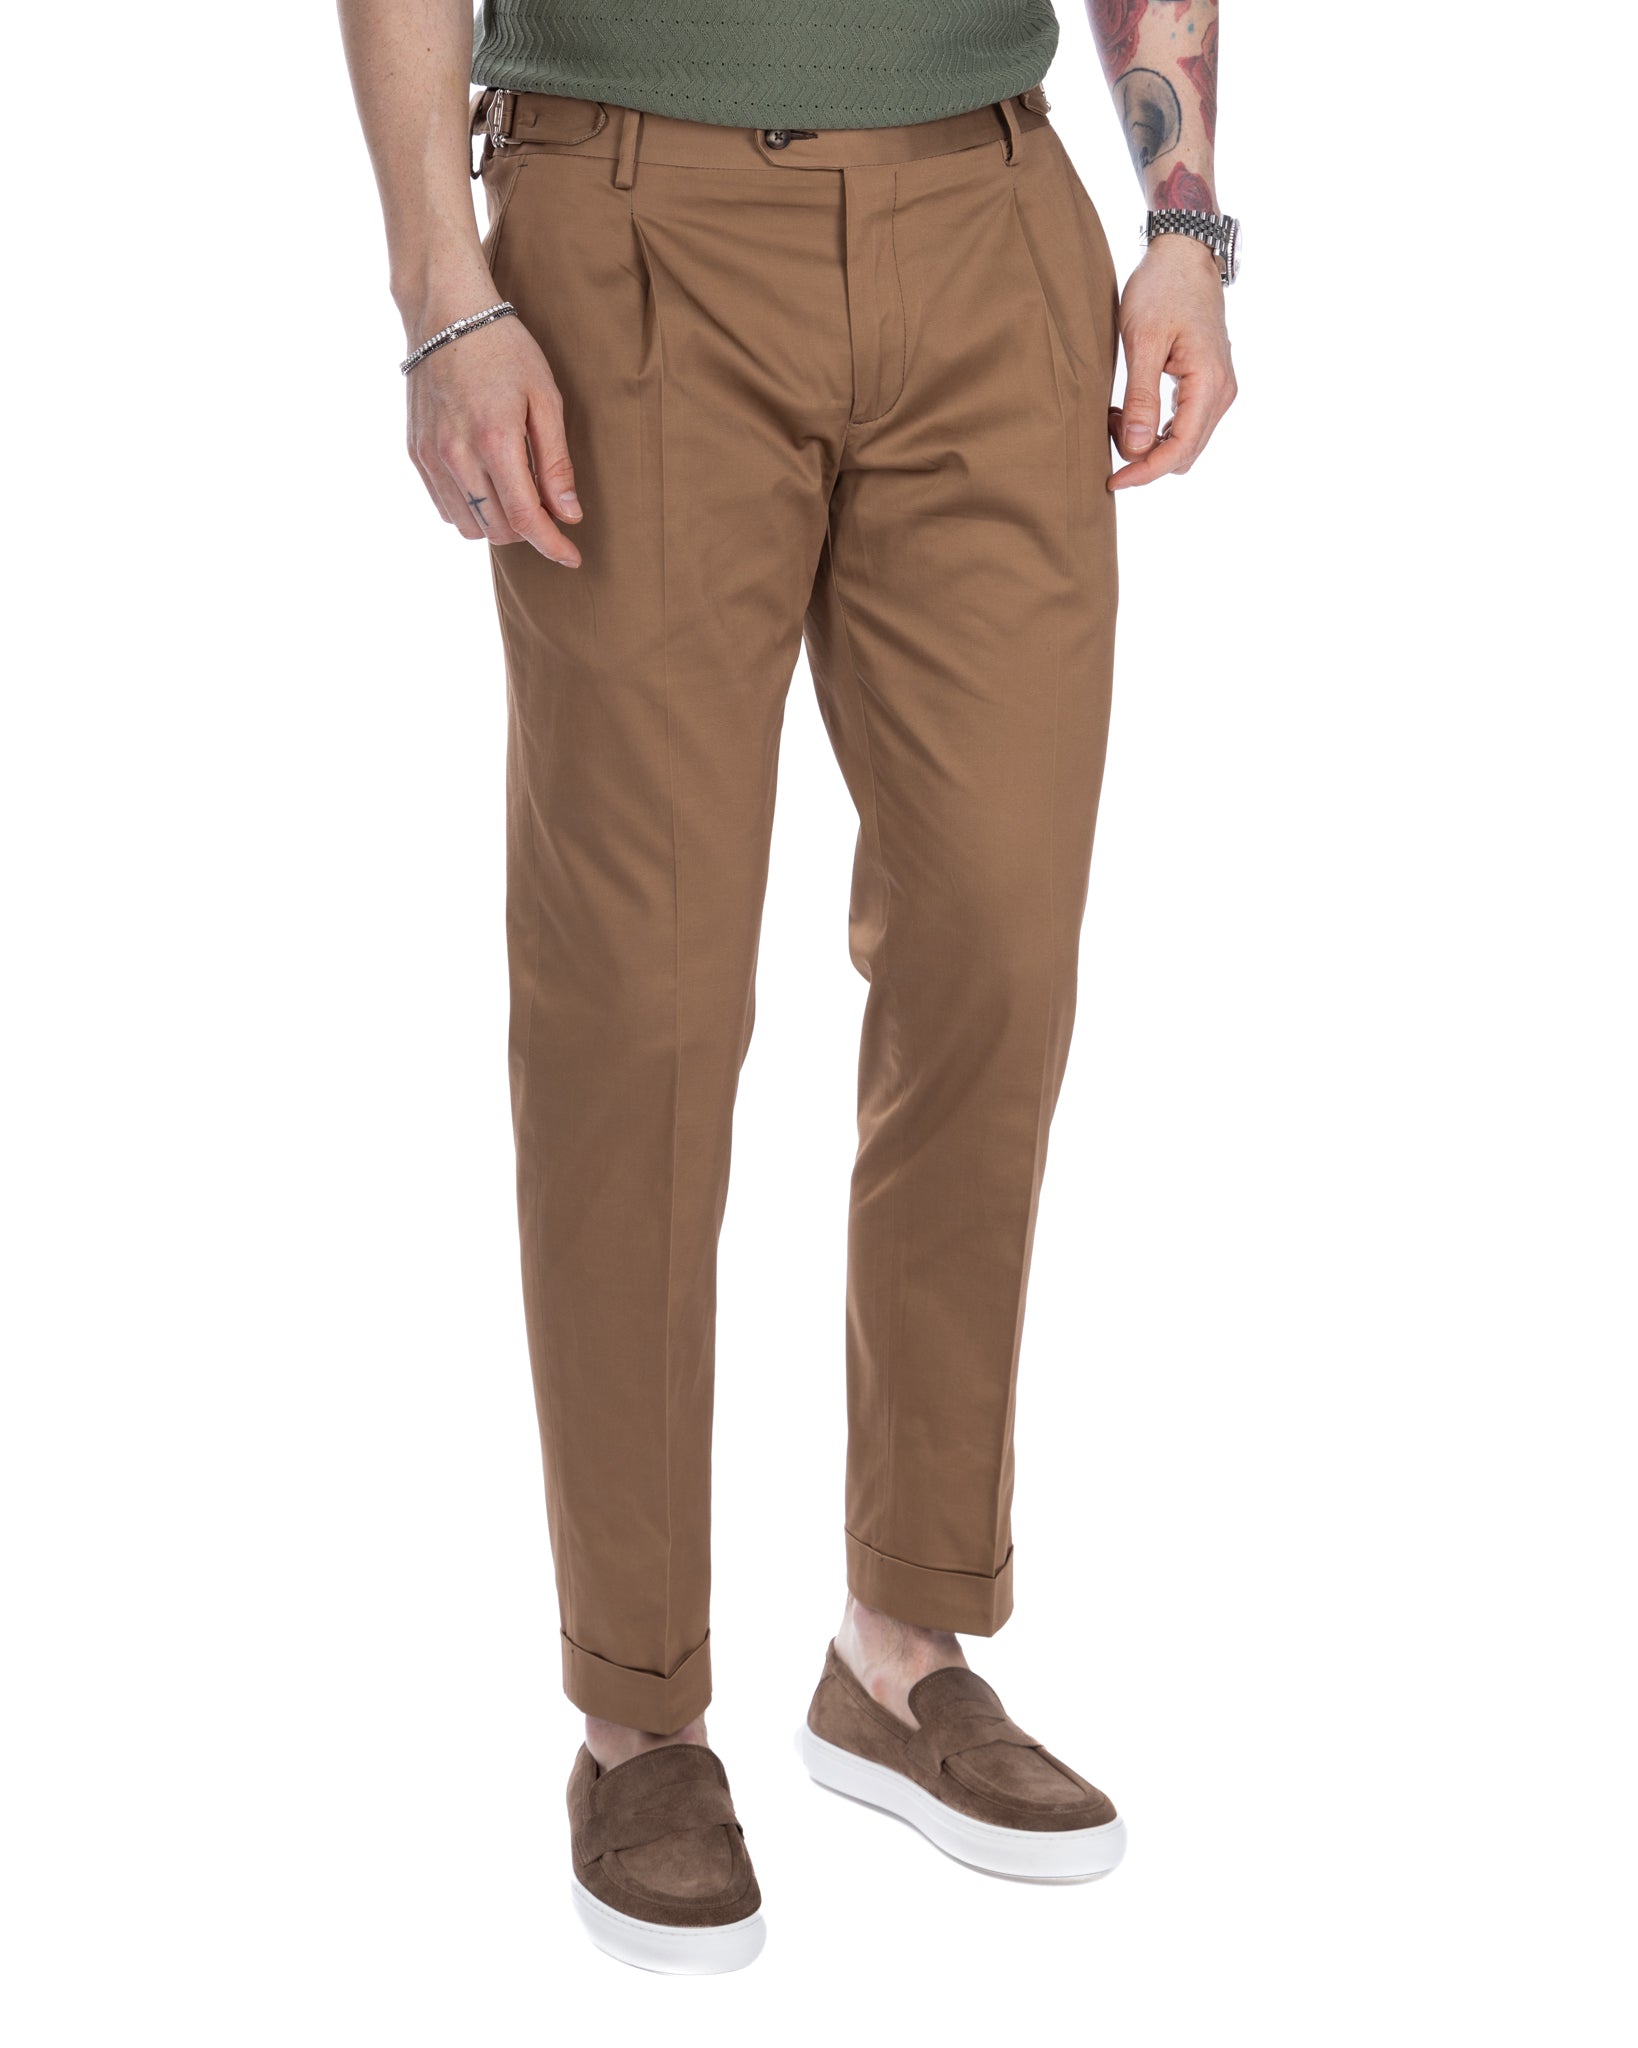 James - high waisted tobacco trousers with buckles